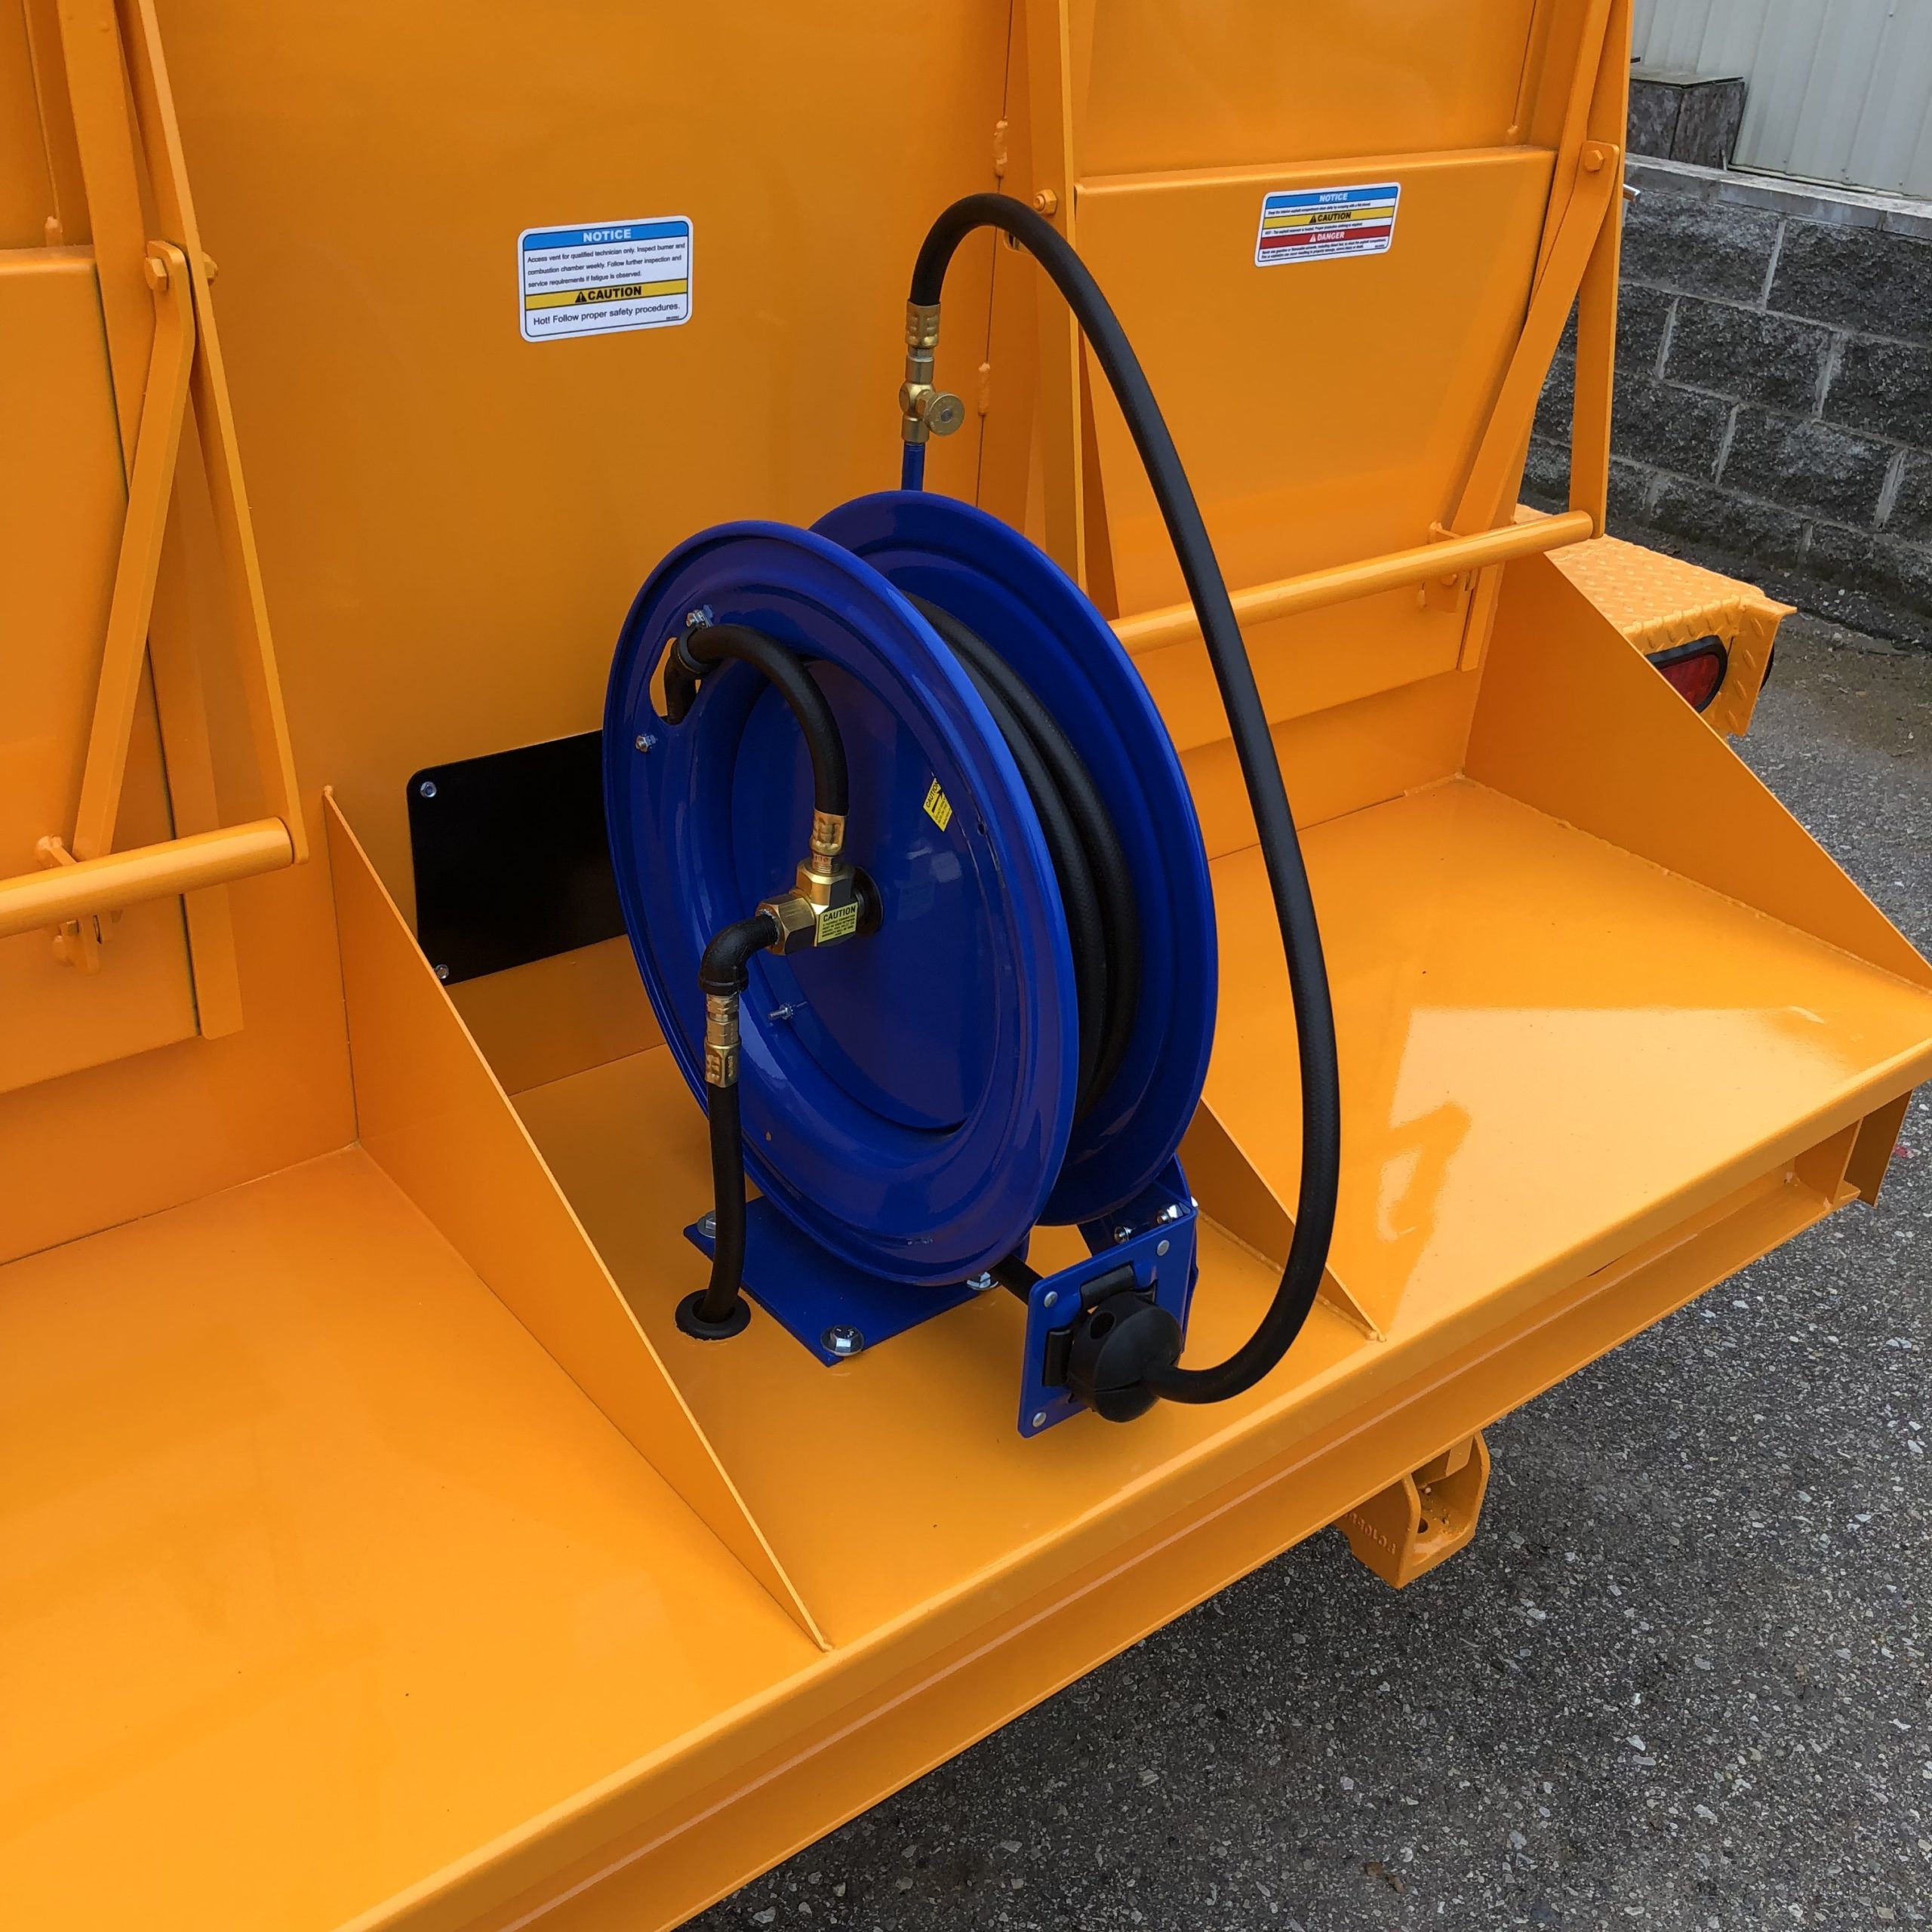 KM International manufactures advanced road repair equipment. A hand torch hose reel is featured in this picture.